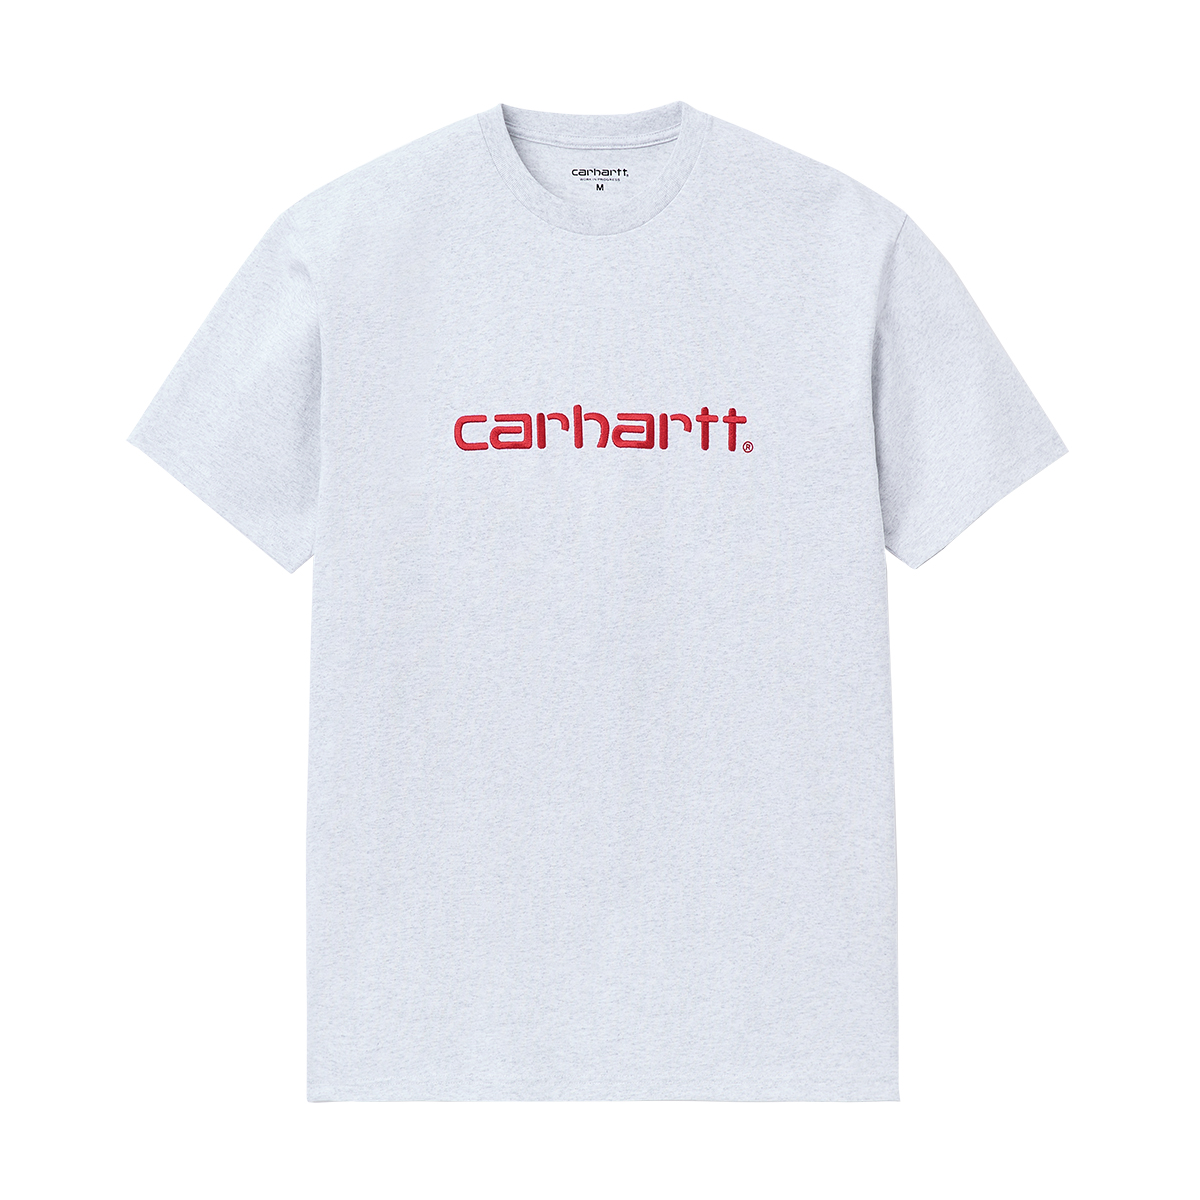 S/S Carhartt Embroidery T-Shirt